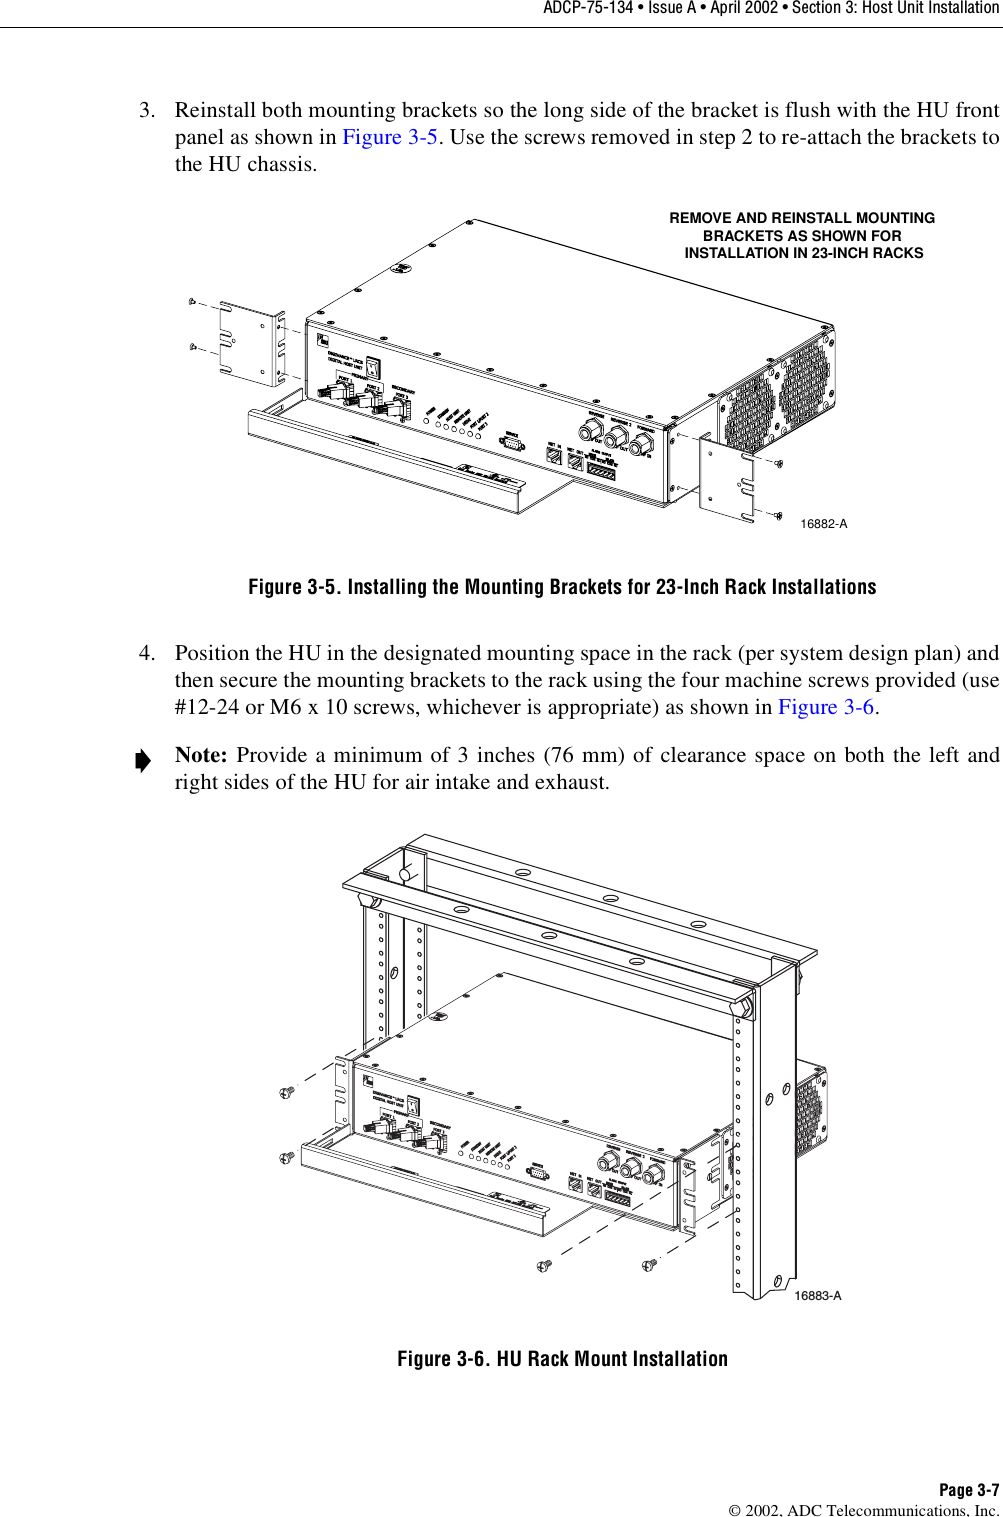 ADCP-75-134 • Issue A • April 2002 • Section 3: Host Unit InstallationPage 3-7©2002, ADC Telecommunications, Inc.3. Reinstall both mounting brackets so the long side of the bracket is flush with the HU frontpanel as shown in Figure 3-5.Use the screws removed in step 2to re-attach the brackets tothe HU chassis.Figure 3-5. Installing the Mounting Brackets for 23-Inch Rack Installations4. Position the HU in the designated mounting space in the rack (per system design plan) andthen secure the mounting brackets to the rack using the four machine screws provided (use#12-24 or M6 x10 screws, whichever is appropriate) as shown in Figure 3-6.Figure 3-6. HU Rack Mount InstallationNote: Provide aminimum of 3inches (76 mm) of clearance space on both the left andright sides of the HU for air intake and exhaust.16882-AREMOVE AND REINSTALL MOUNTINGBRACKETS AS SHOWN FOR INSTALLATION IN 23-INCH RACKS16883-A 